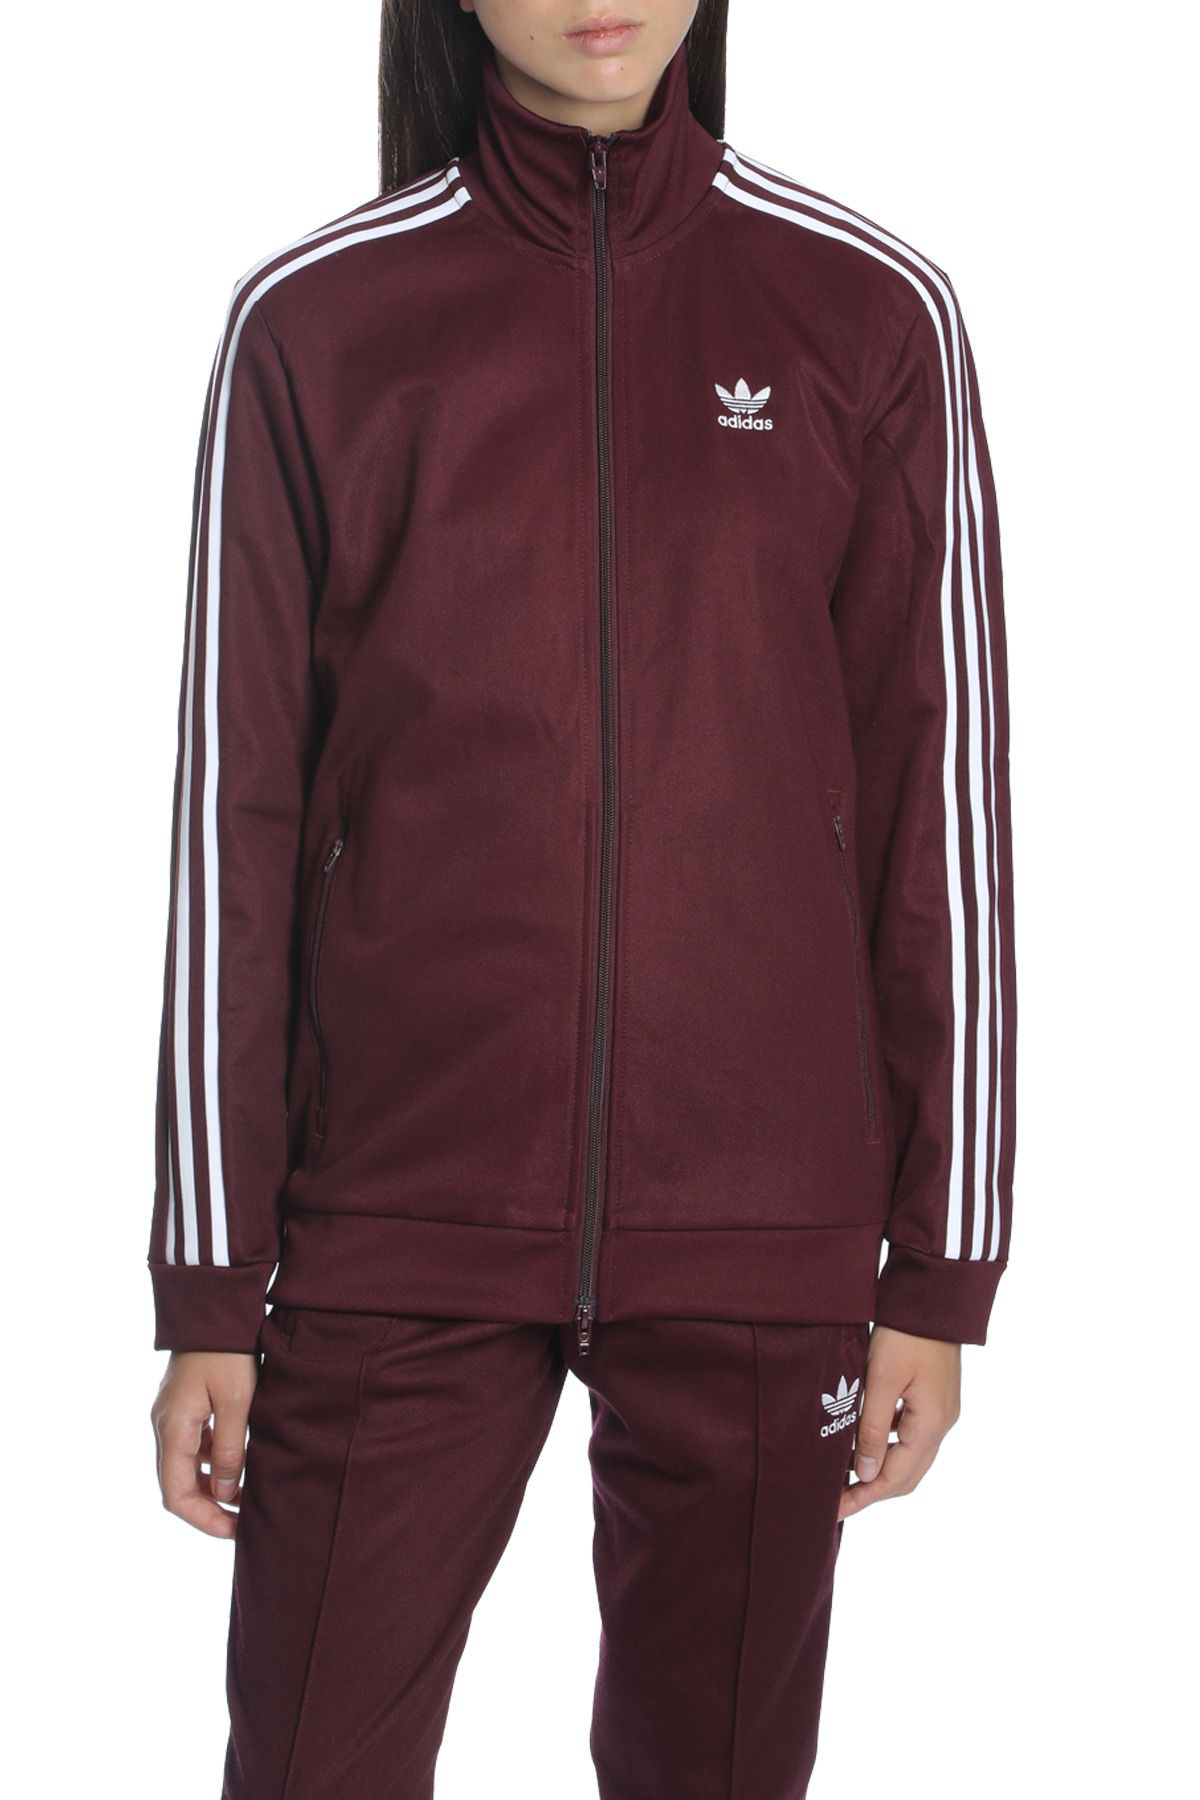 bordeaux adidas tracksuit|OFF 68%| clubseatime.ru